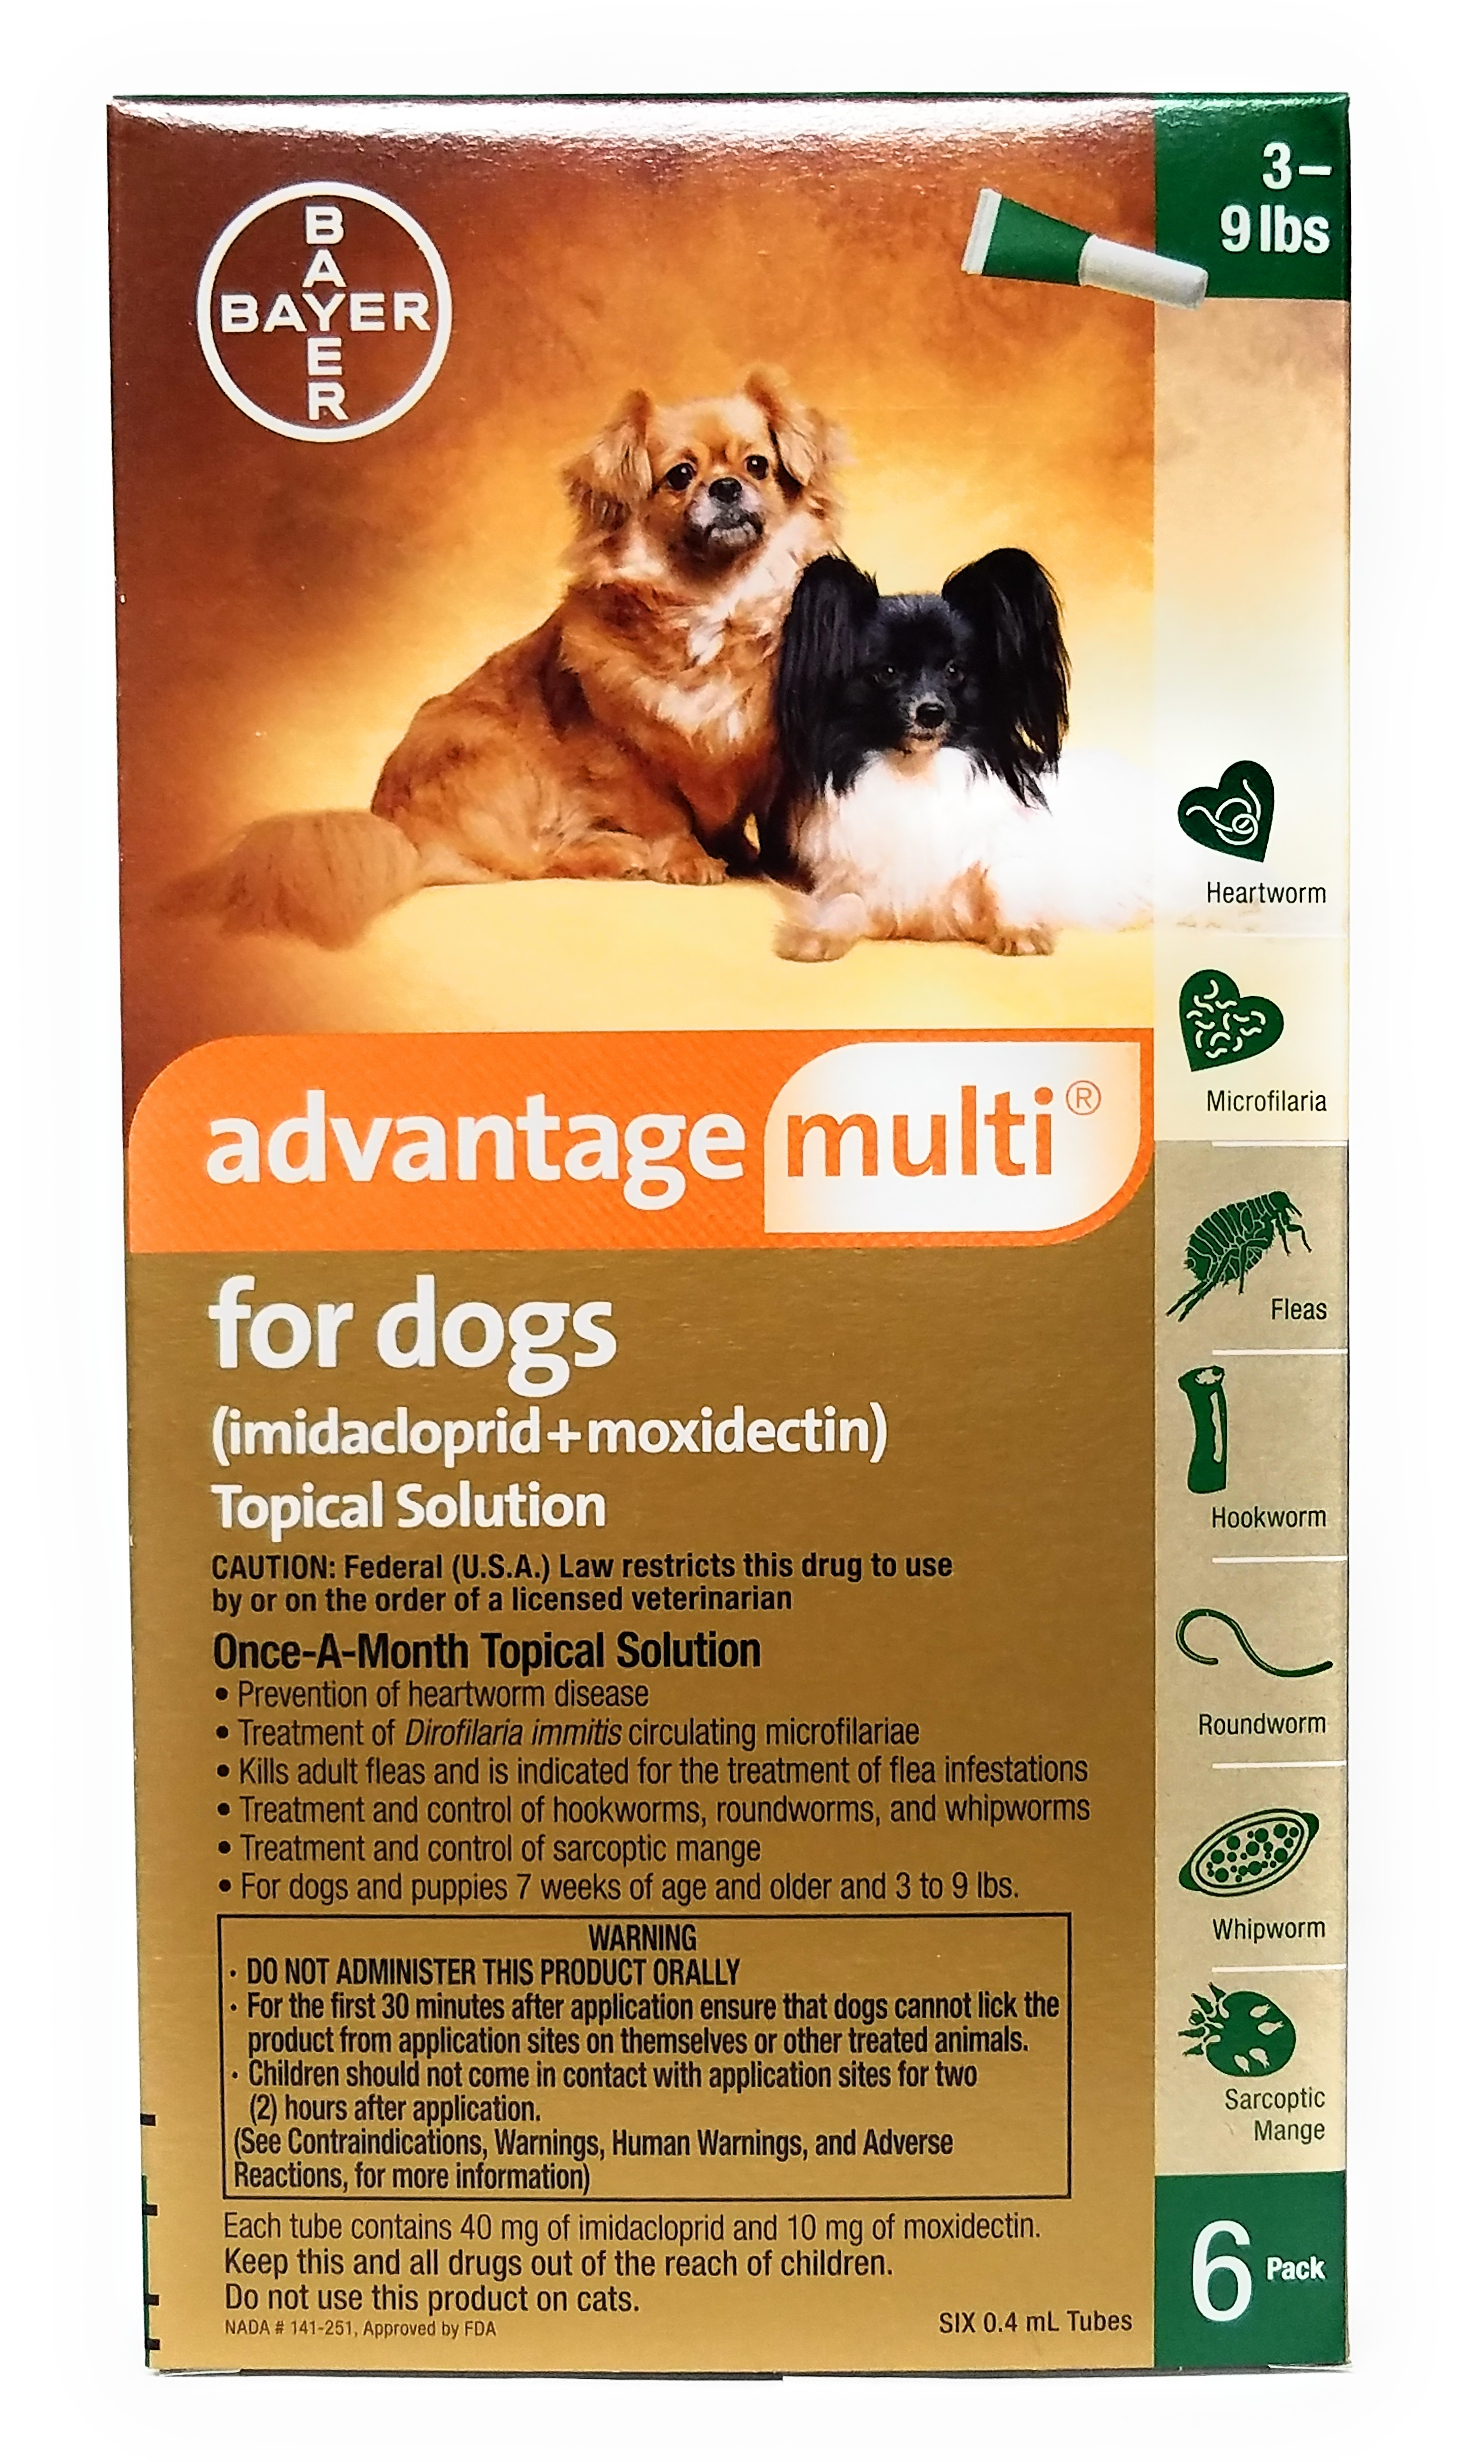 vet-approved-rx-advantage-multi-dog-3-9-lbs-6-doses